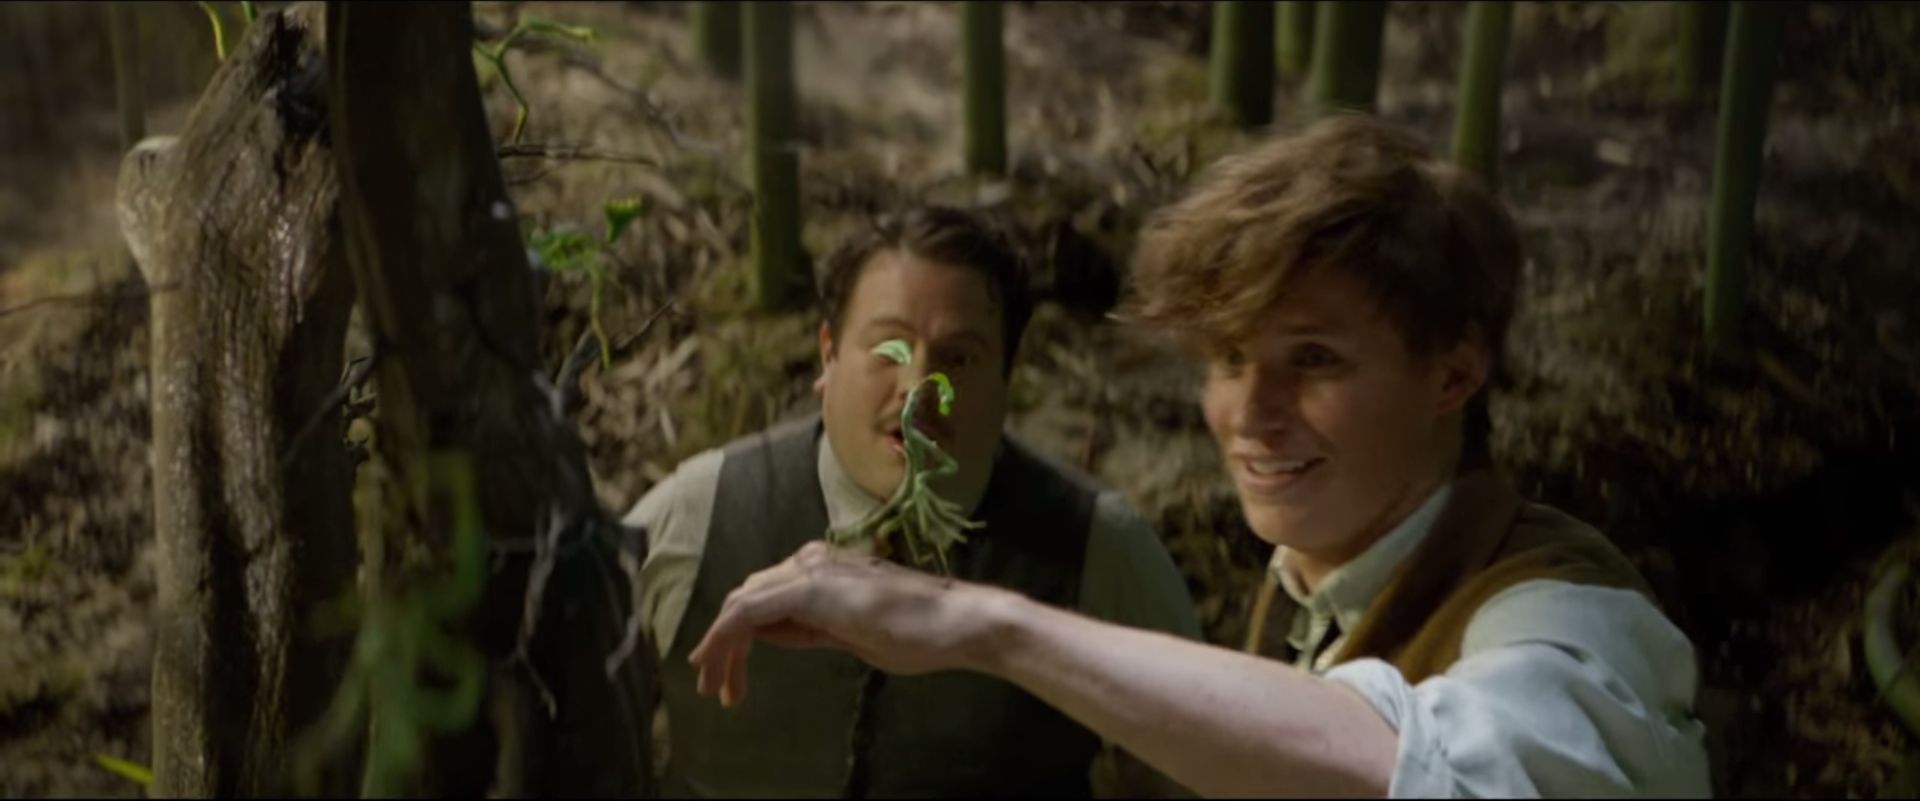 Fantastic Beasts And Where To Find Them Watch 2016 Film Online